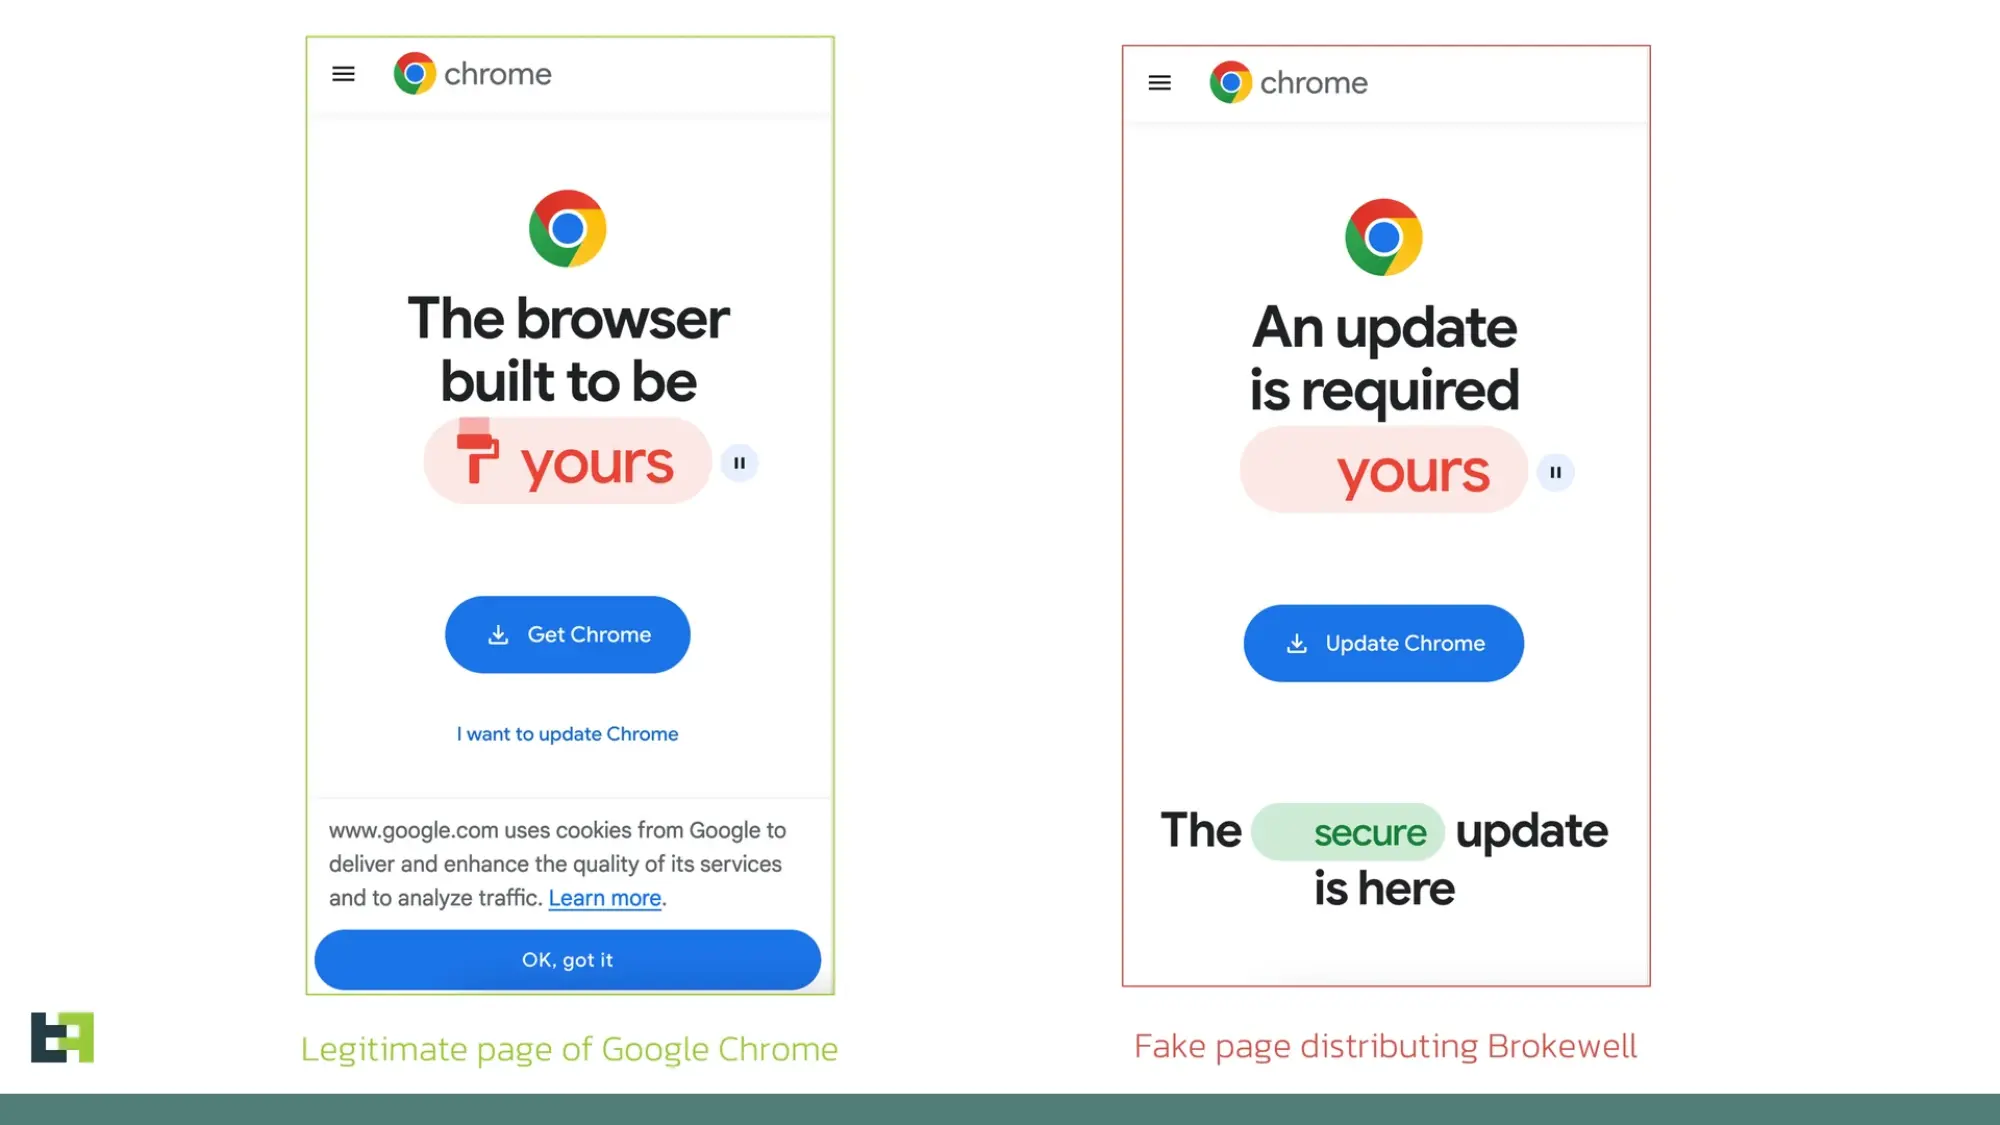 Comparison of fake ad that installs Brokewell versus a real Chrome ad